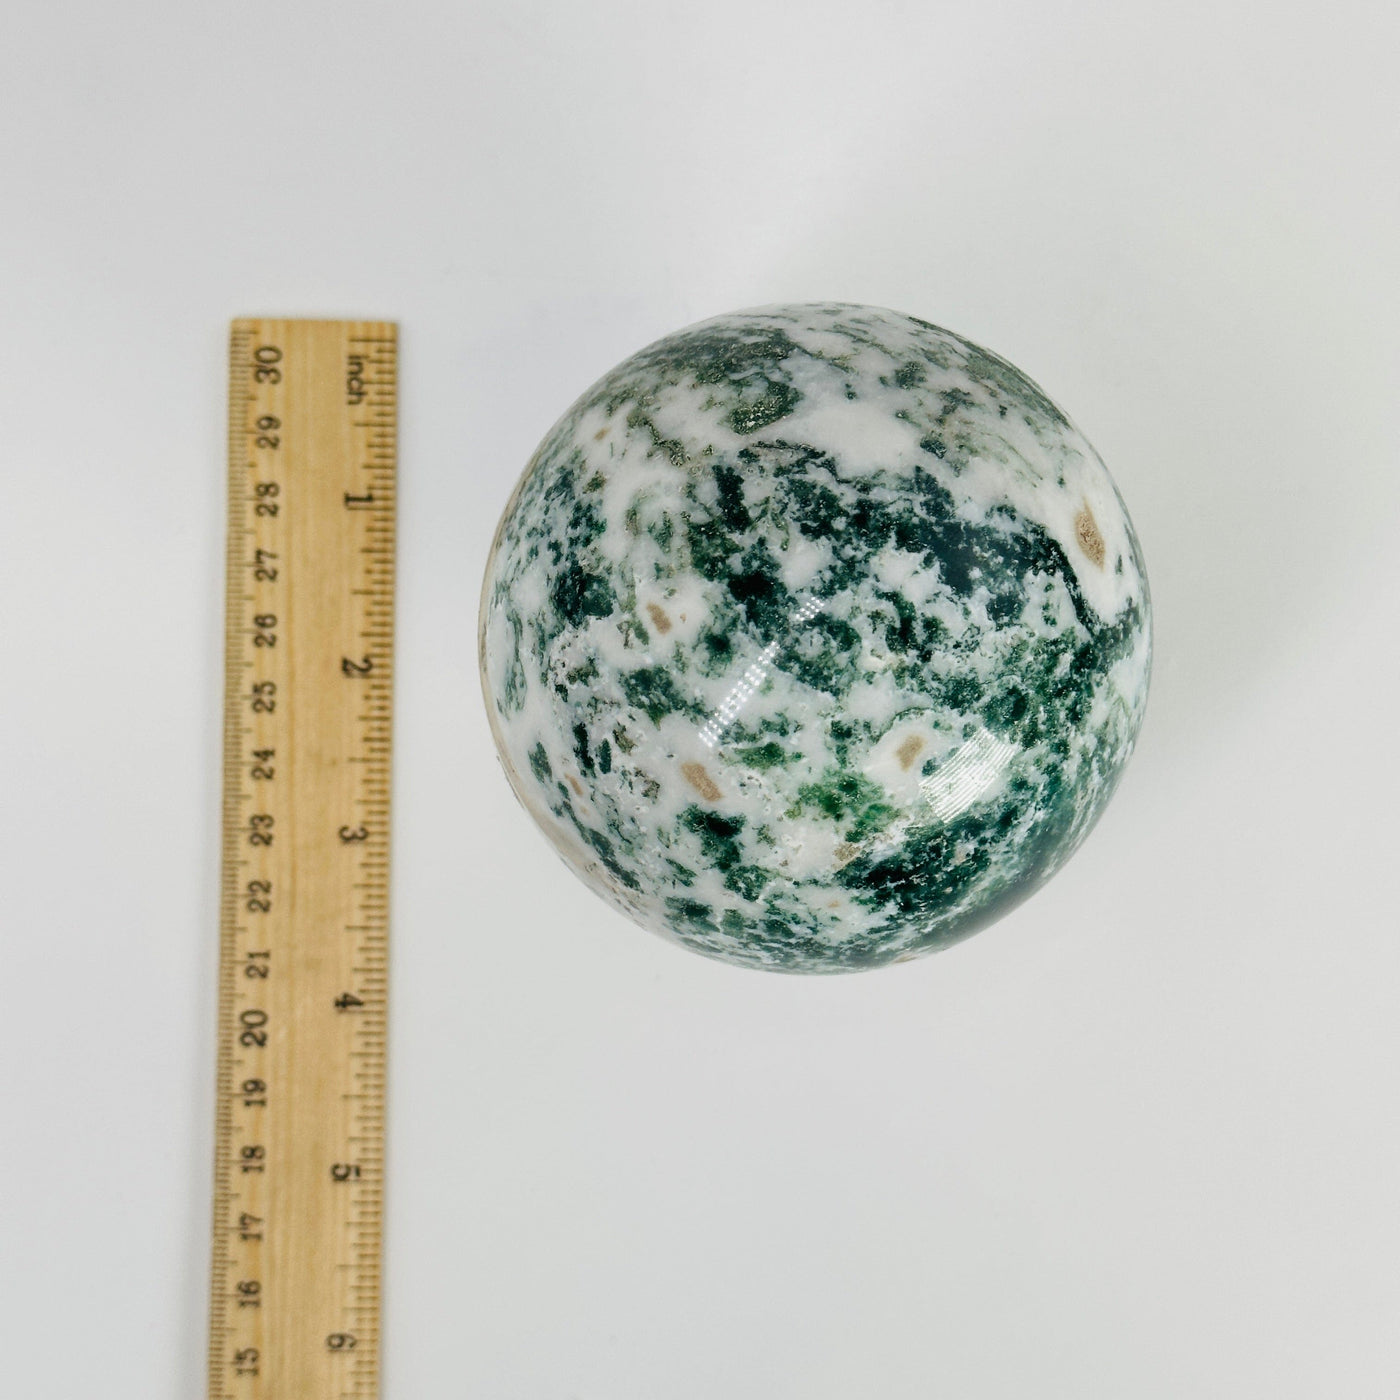 moss agate sphere next to a ruler for size reference